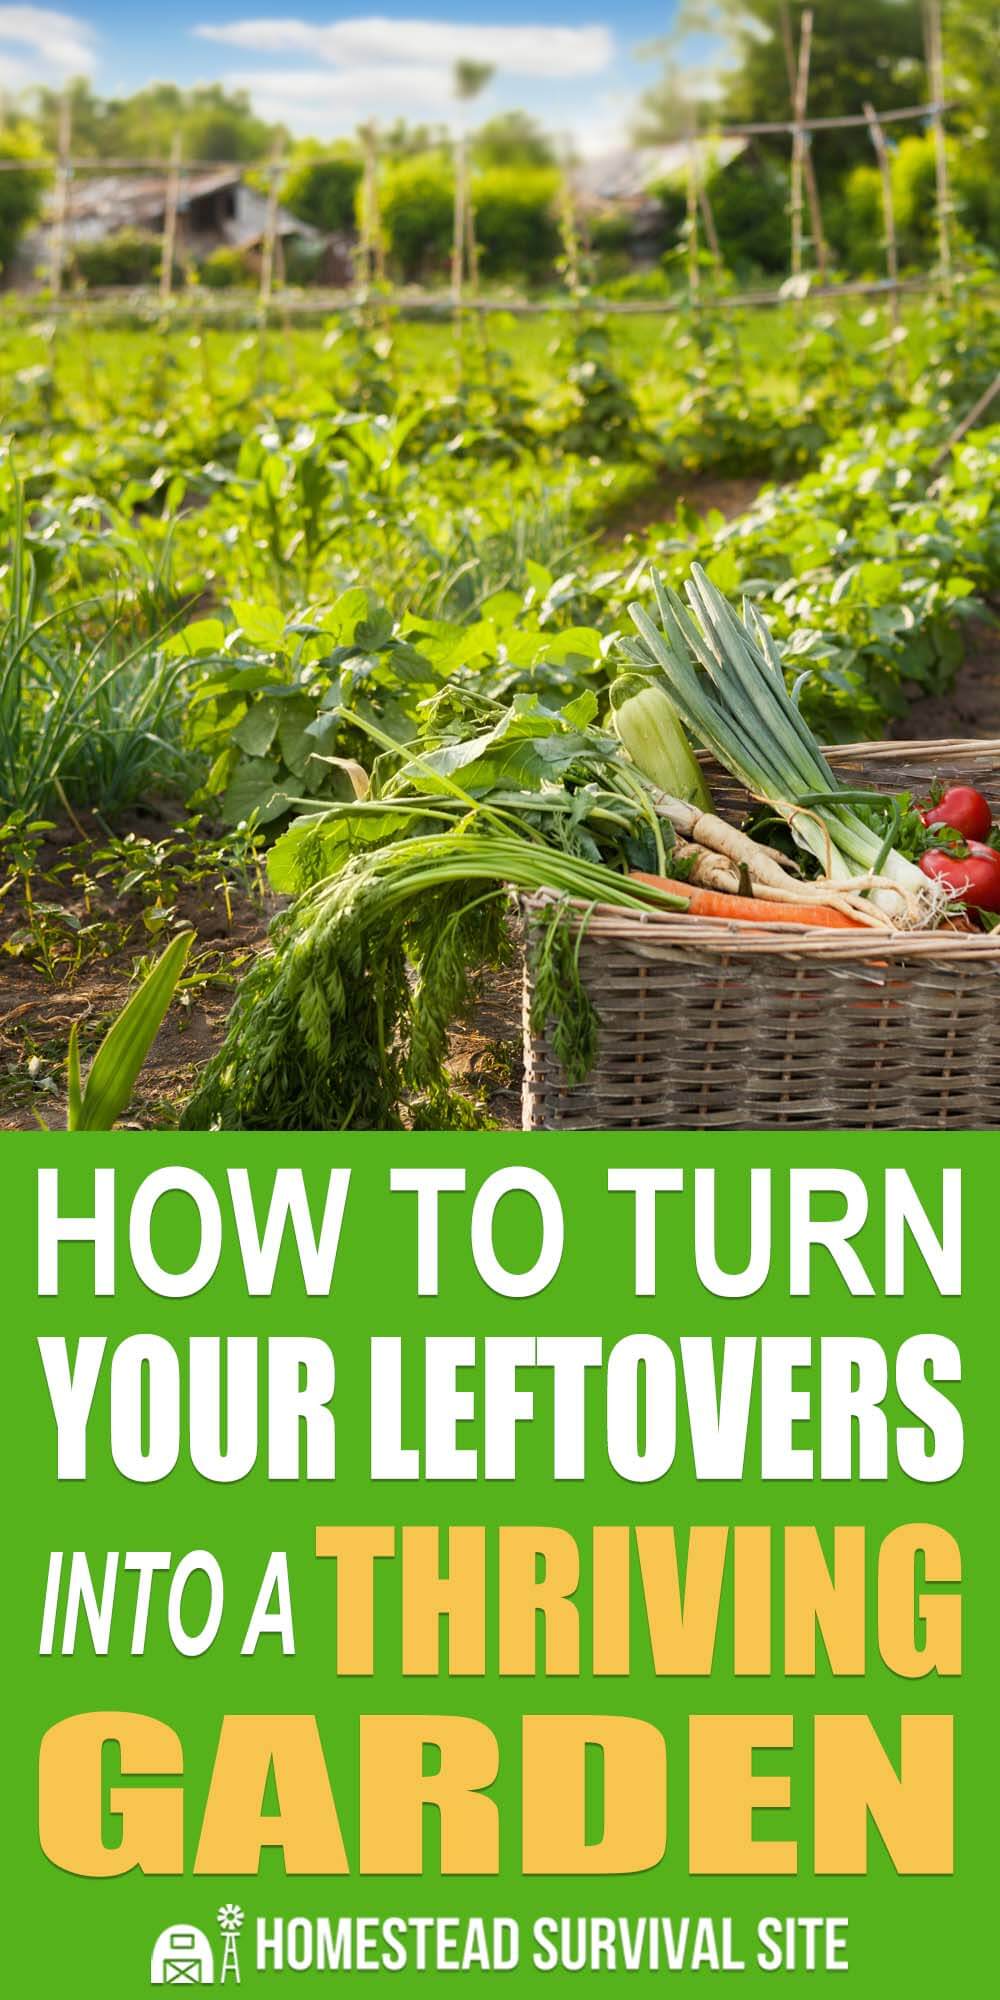 How To Turn Your Leftovers Into A Thriving Garden